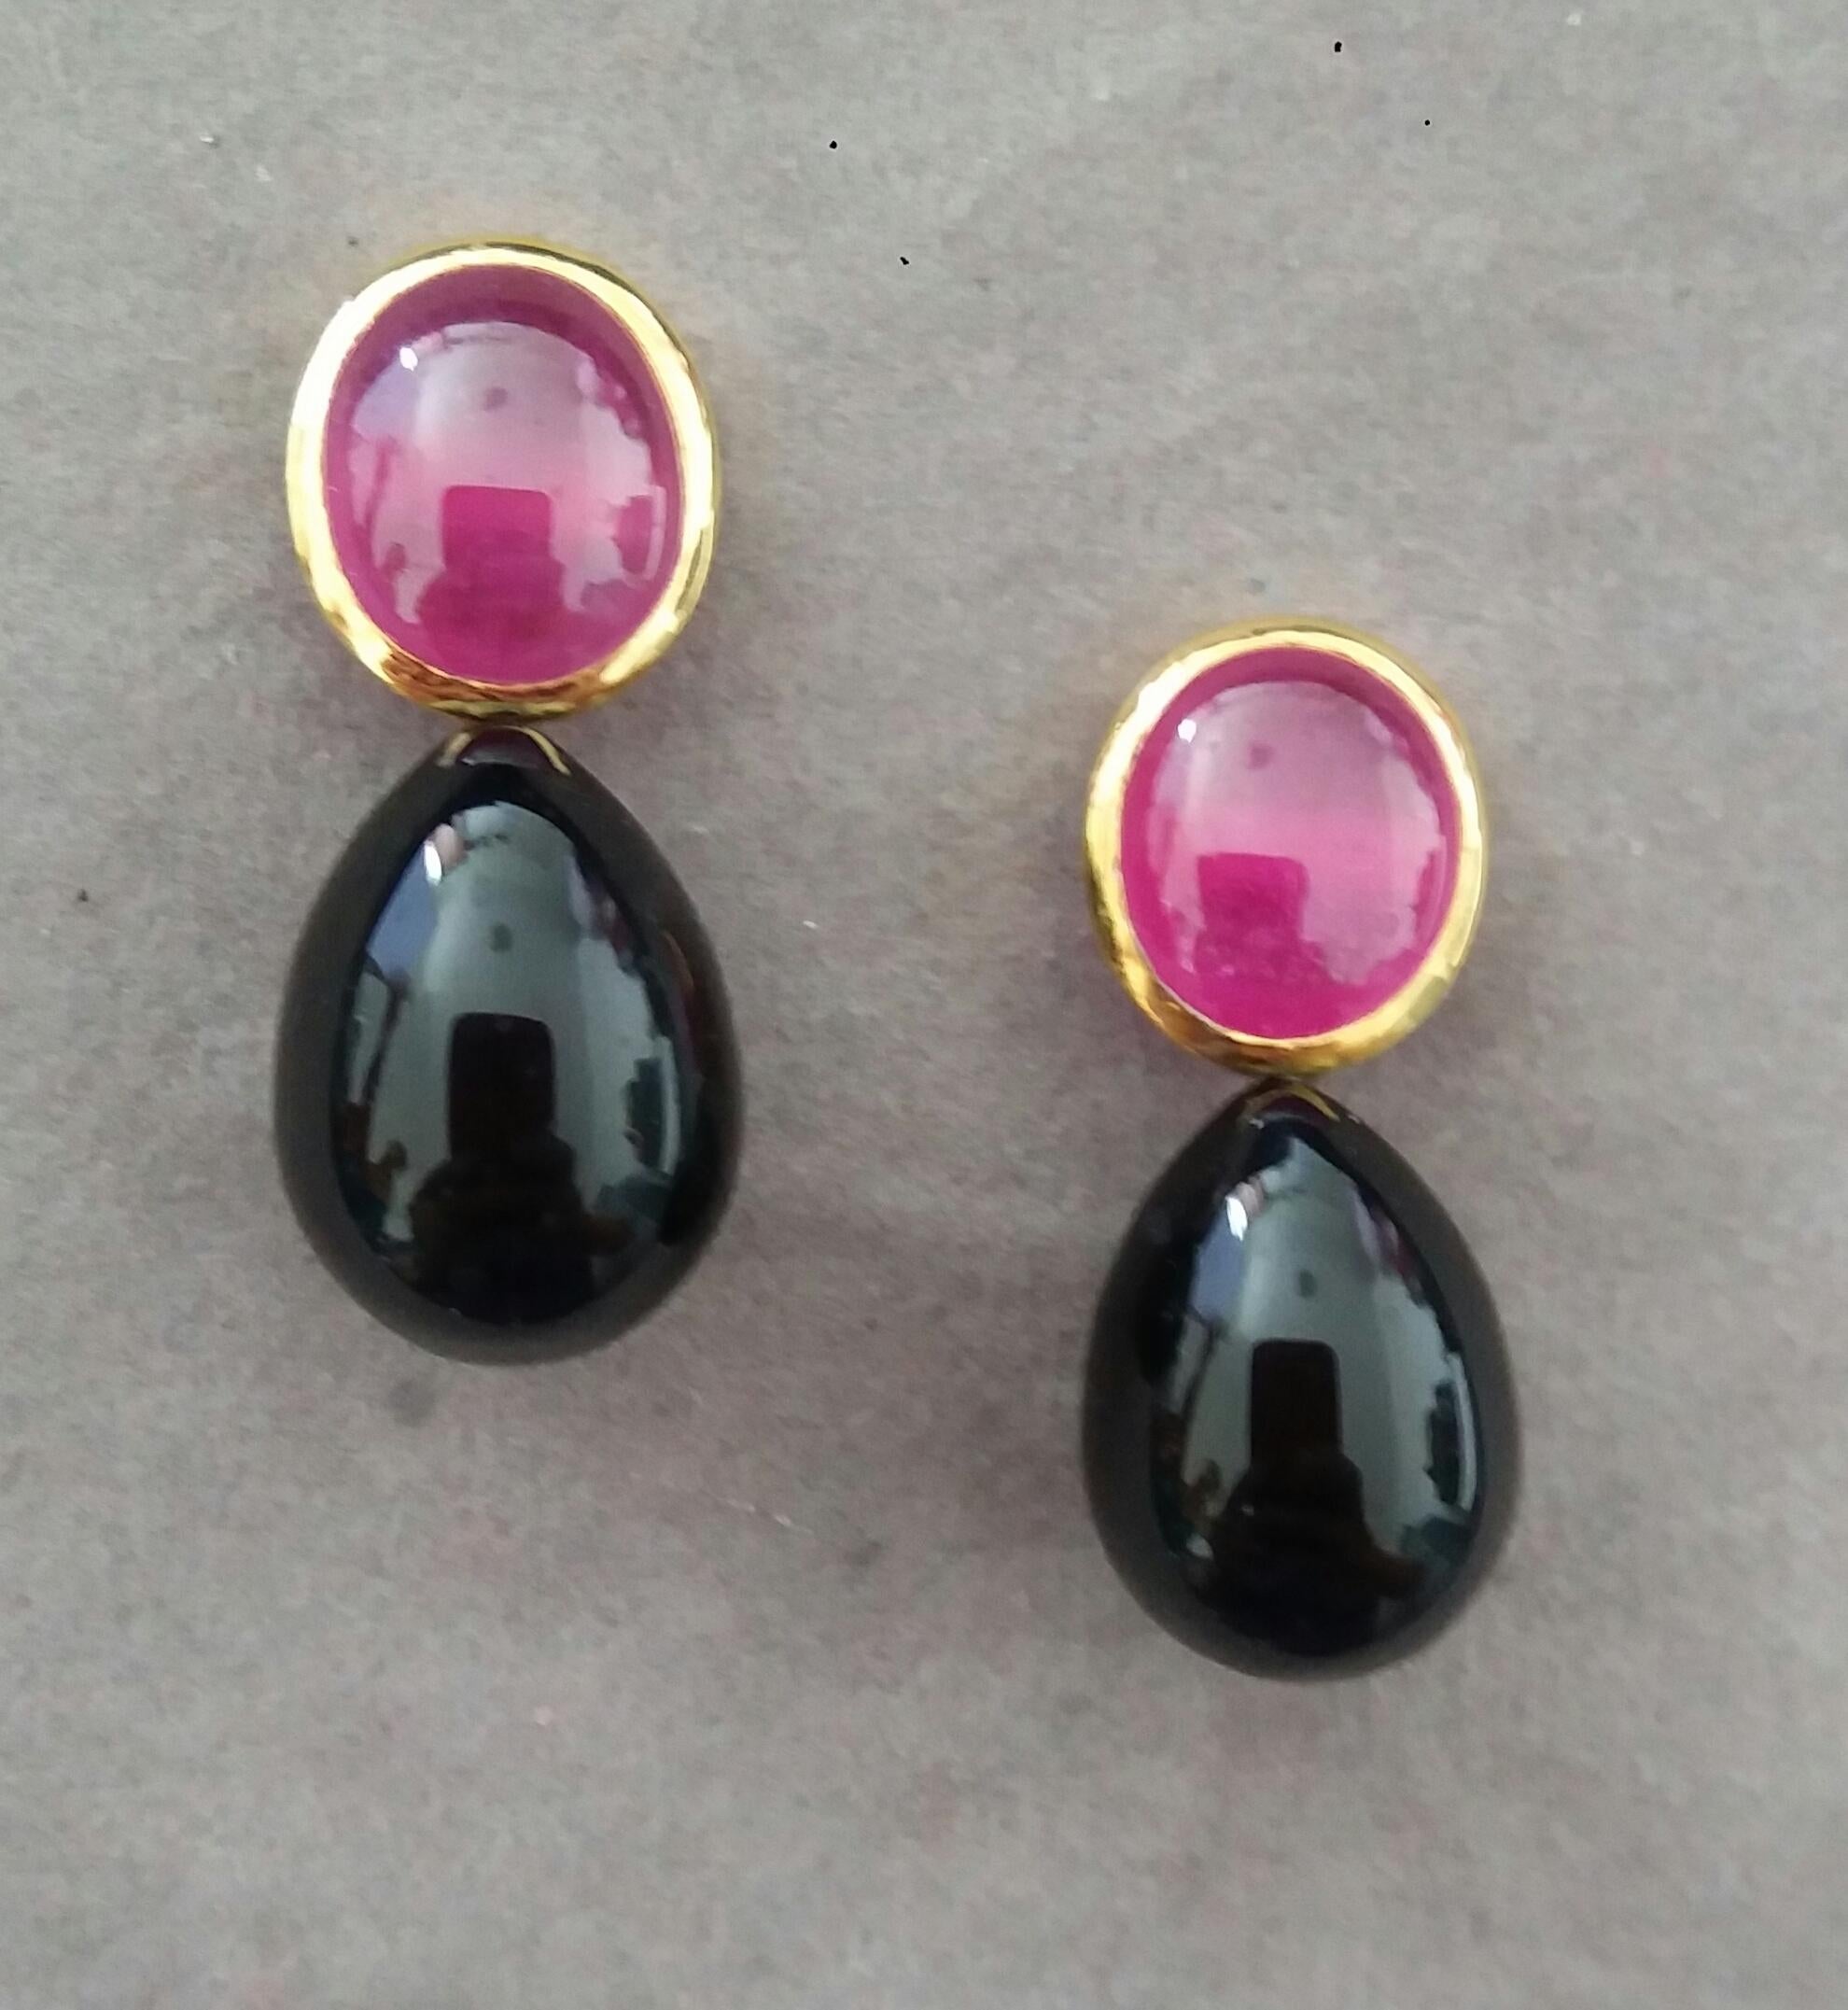 Simple Chic Earrings with top part made of 2 Natural Ruby Oval Cabochons  measuring 9x11 mm and weighing 8,7 carats set in 14 Kt yellow bezel from which are attached 2 Black Onyx  round drops measuring 13x18 mm.

In 1978 our workshop started in